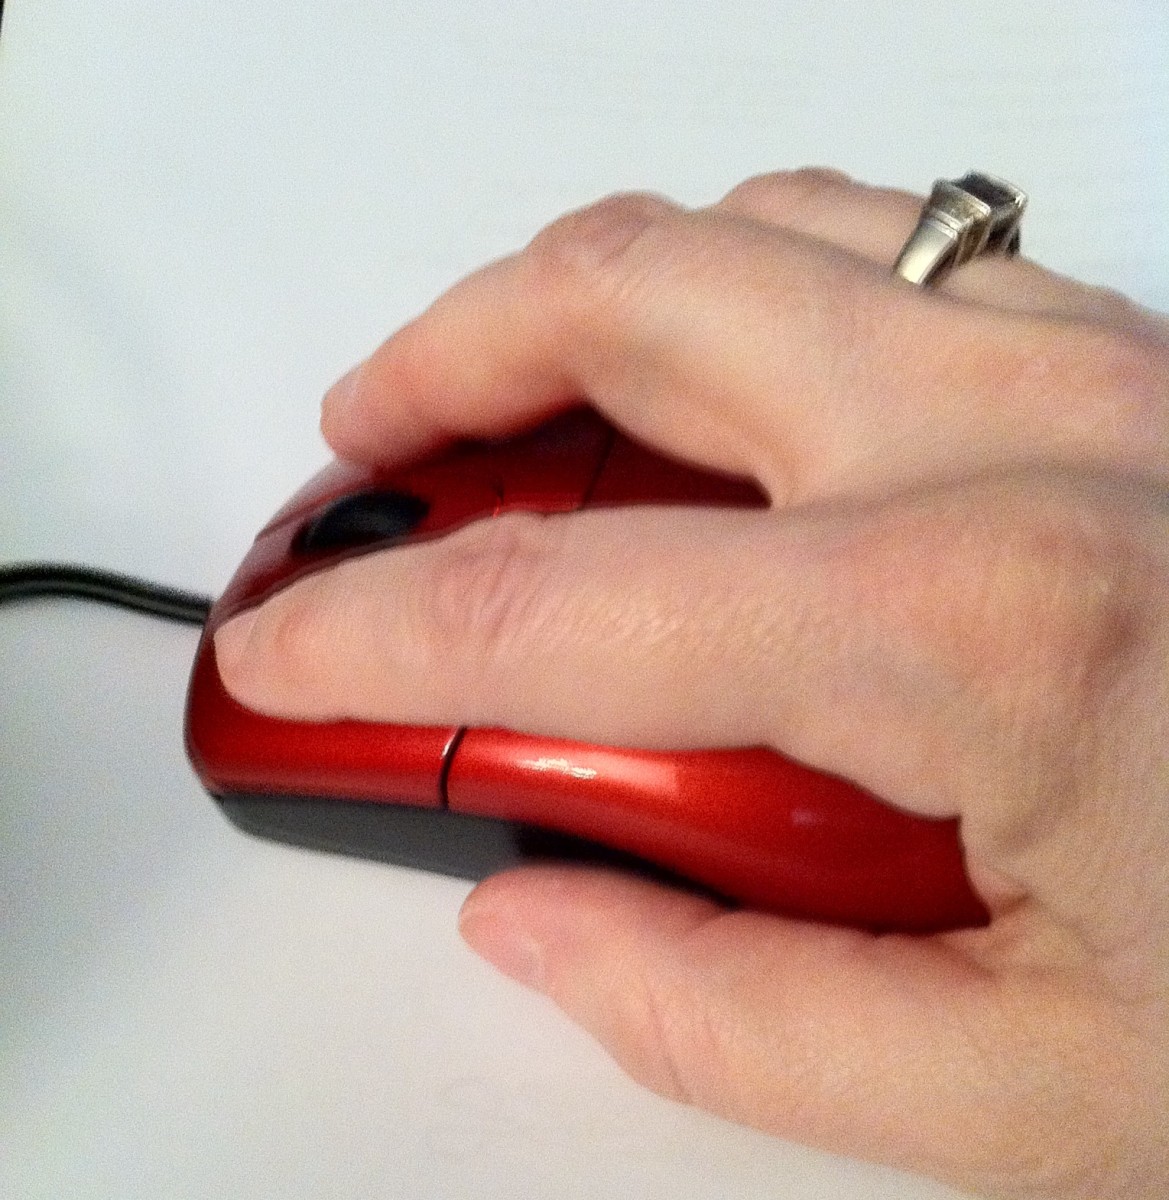 Review of the Inland USB Mouse (Optical)